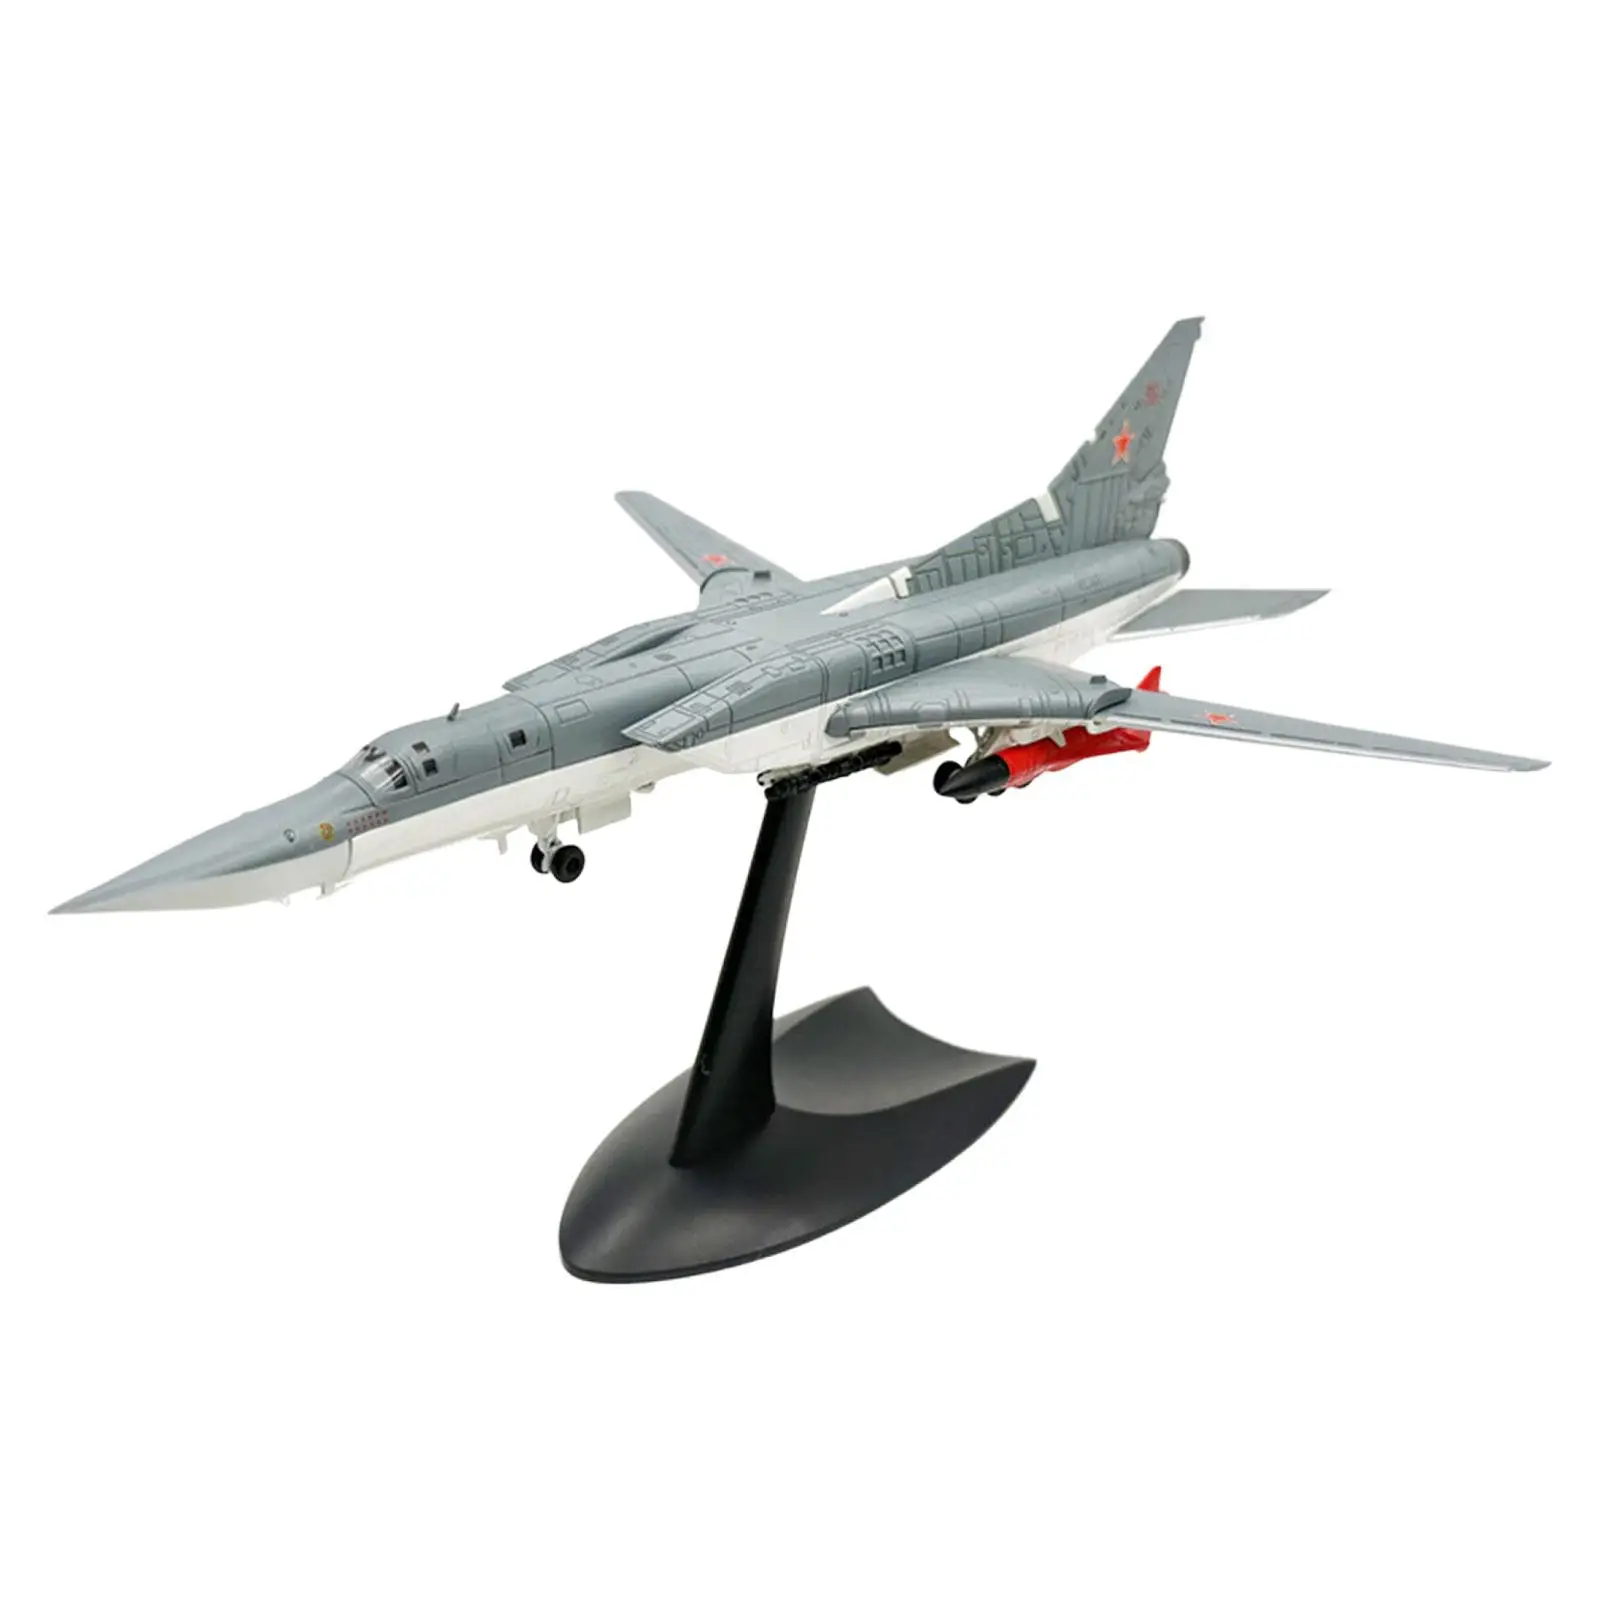 Simulation 1/144 Fighter Diecast Model Kids Adults Toy Ornament Retro Plane with Display Stand for Bedroom Office Shelf